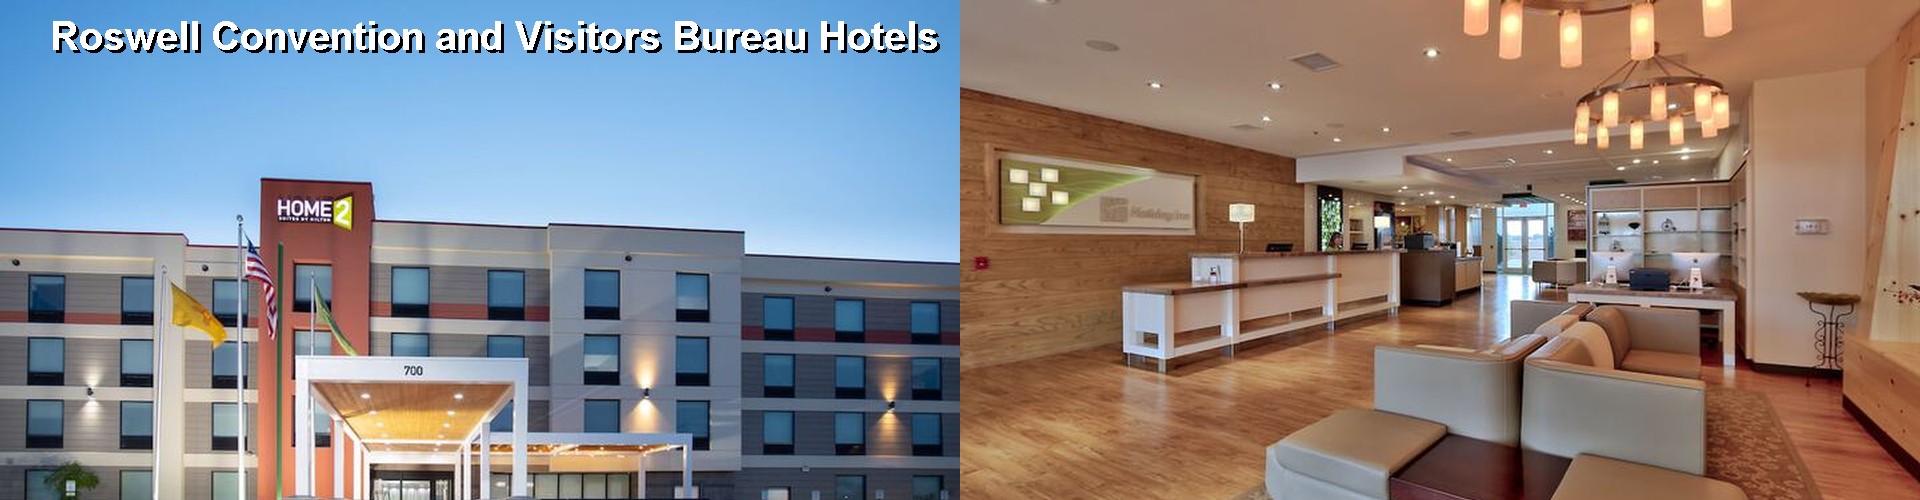 5 Best Hotels near Roswell Convention and Visitors Bureau